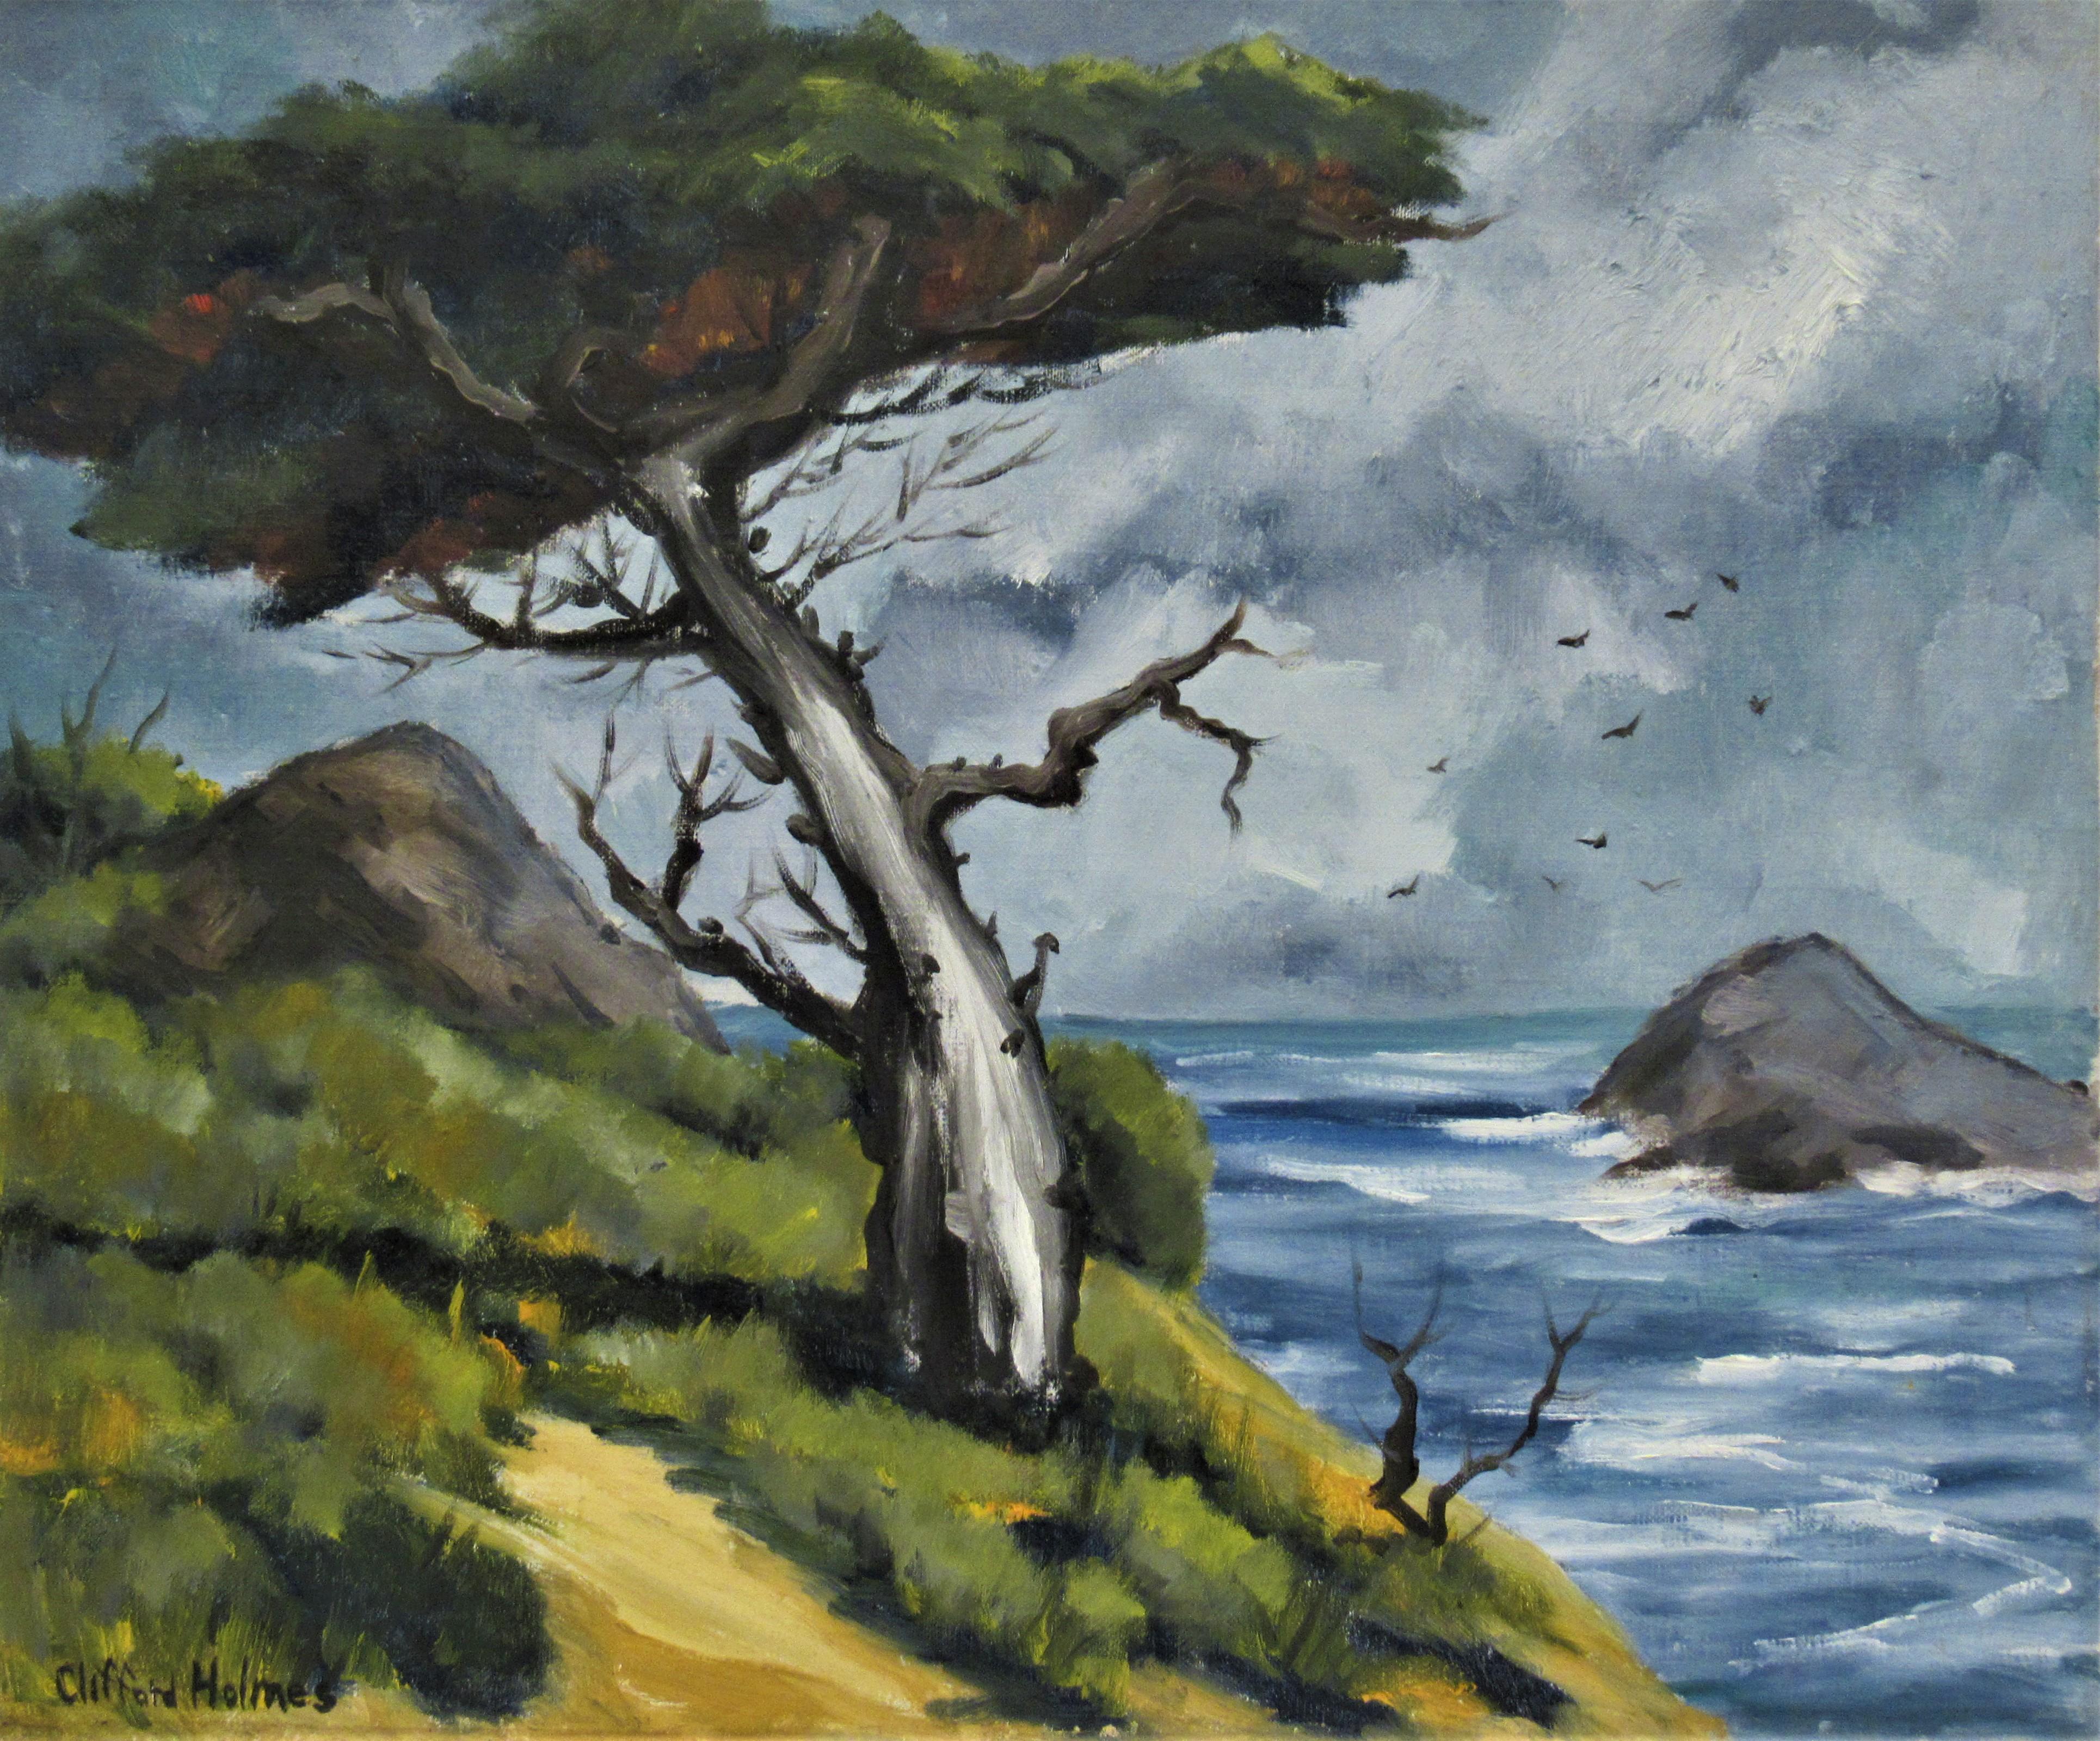 Clifford Holmes Figurative Painting - Coastal Scene with Cypress